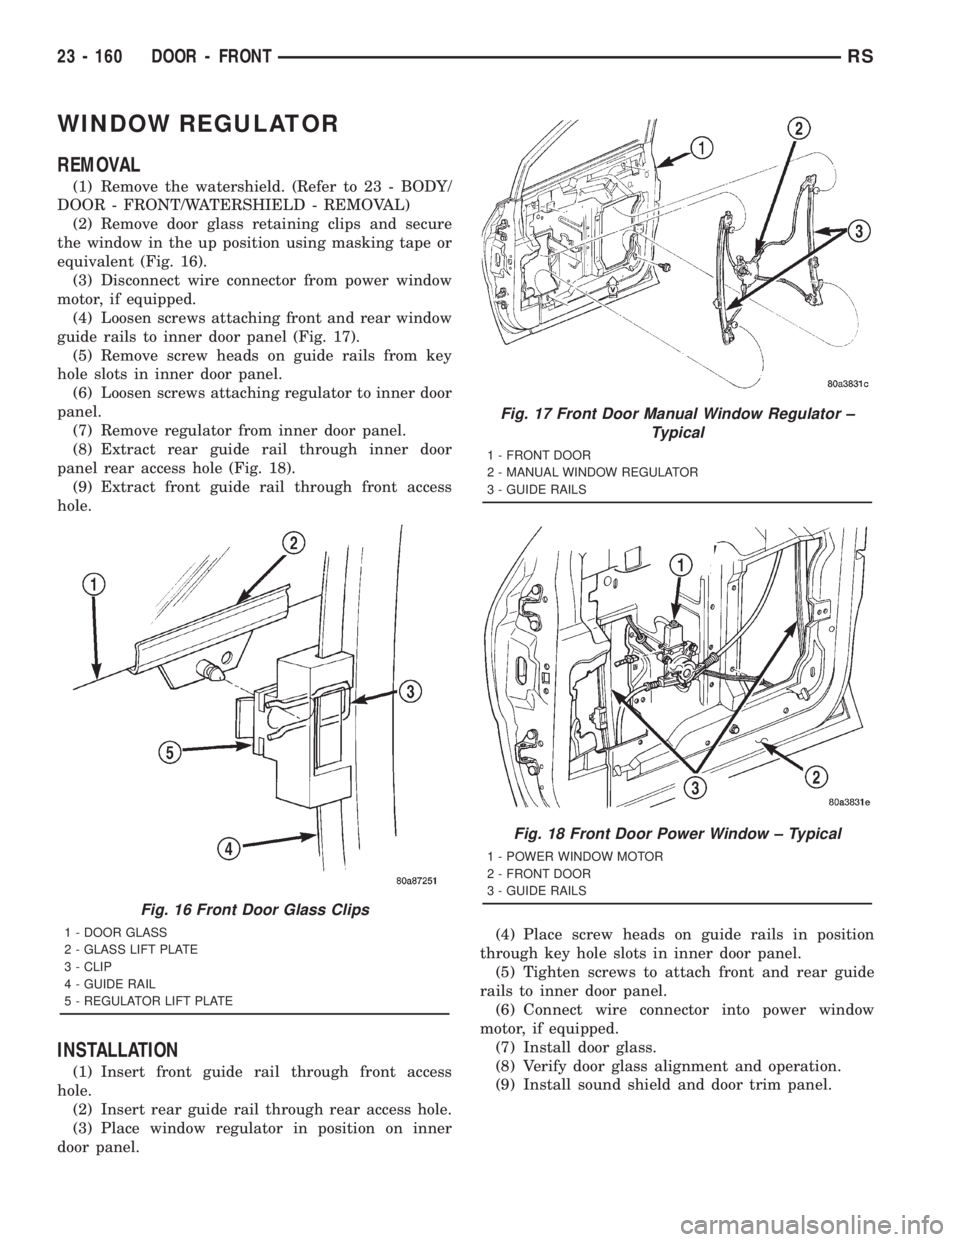 CHRYSLER VOYAGER 2001  Service Manual WINDOW REGULATOR
REMOVAL
(1) Remove the watershield. (Refer to 23 - BODY/
DOOR - FRONT/WATERSHIELD - REMOVAL)
(2) Remove door glass retaining clips and secure
the window in the up position using maski